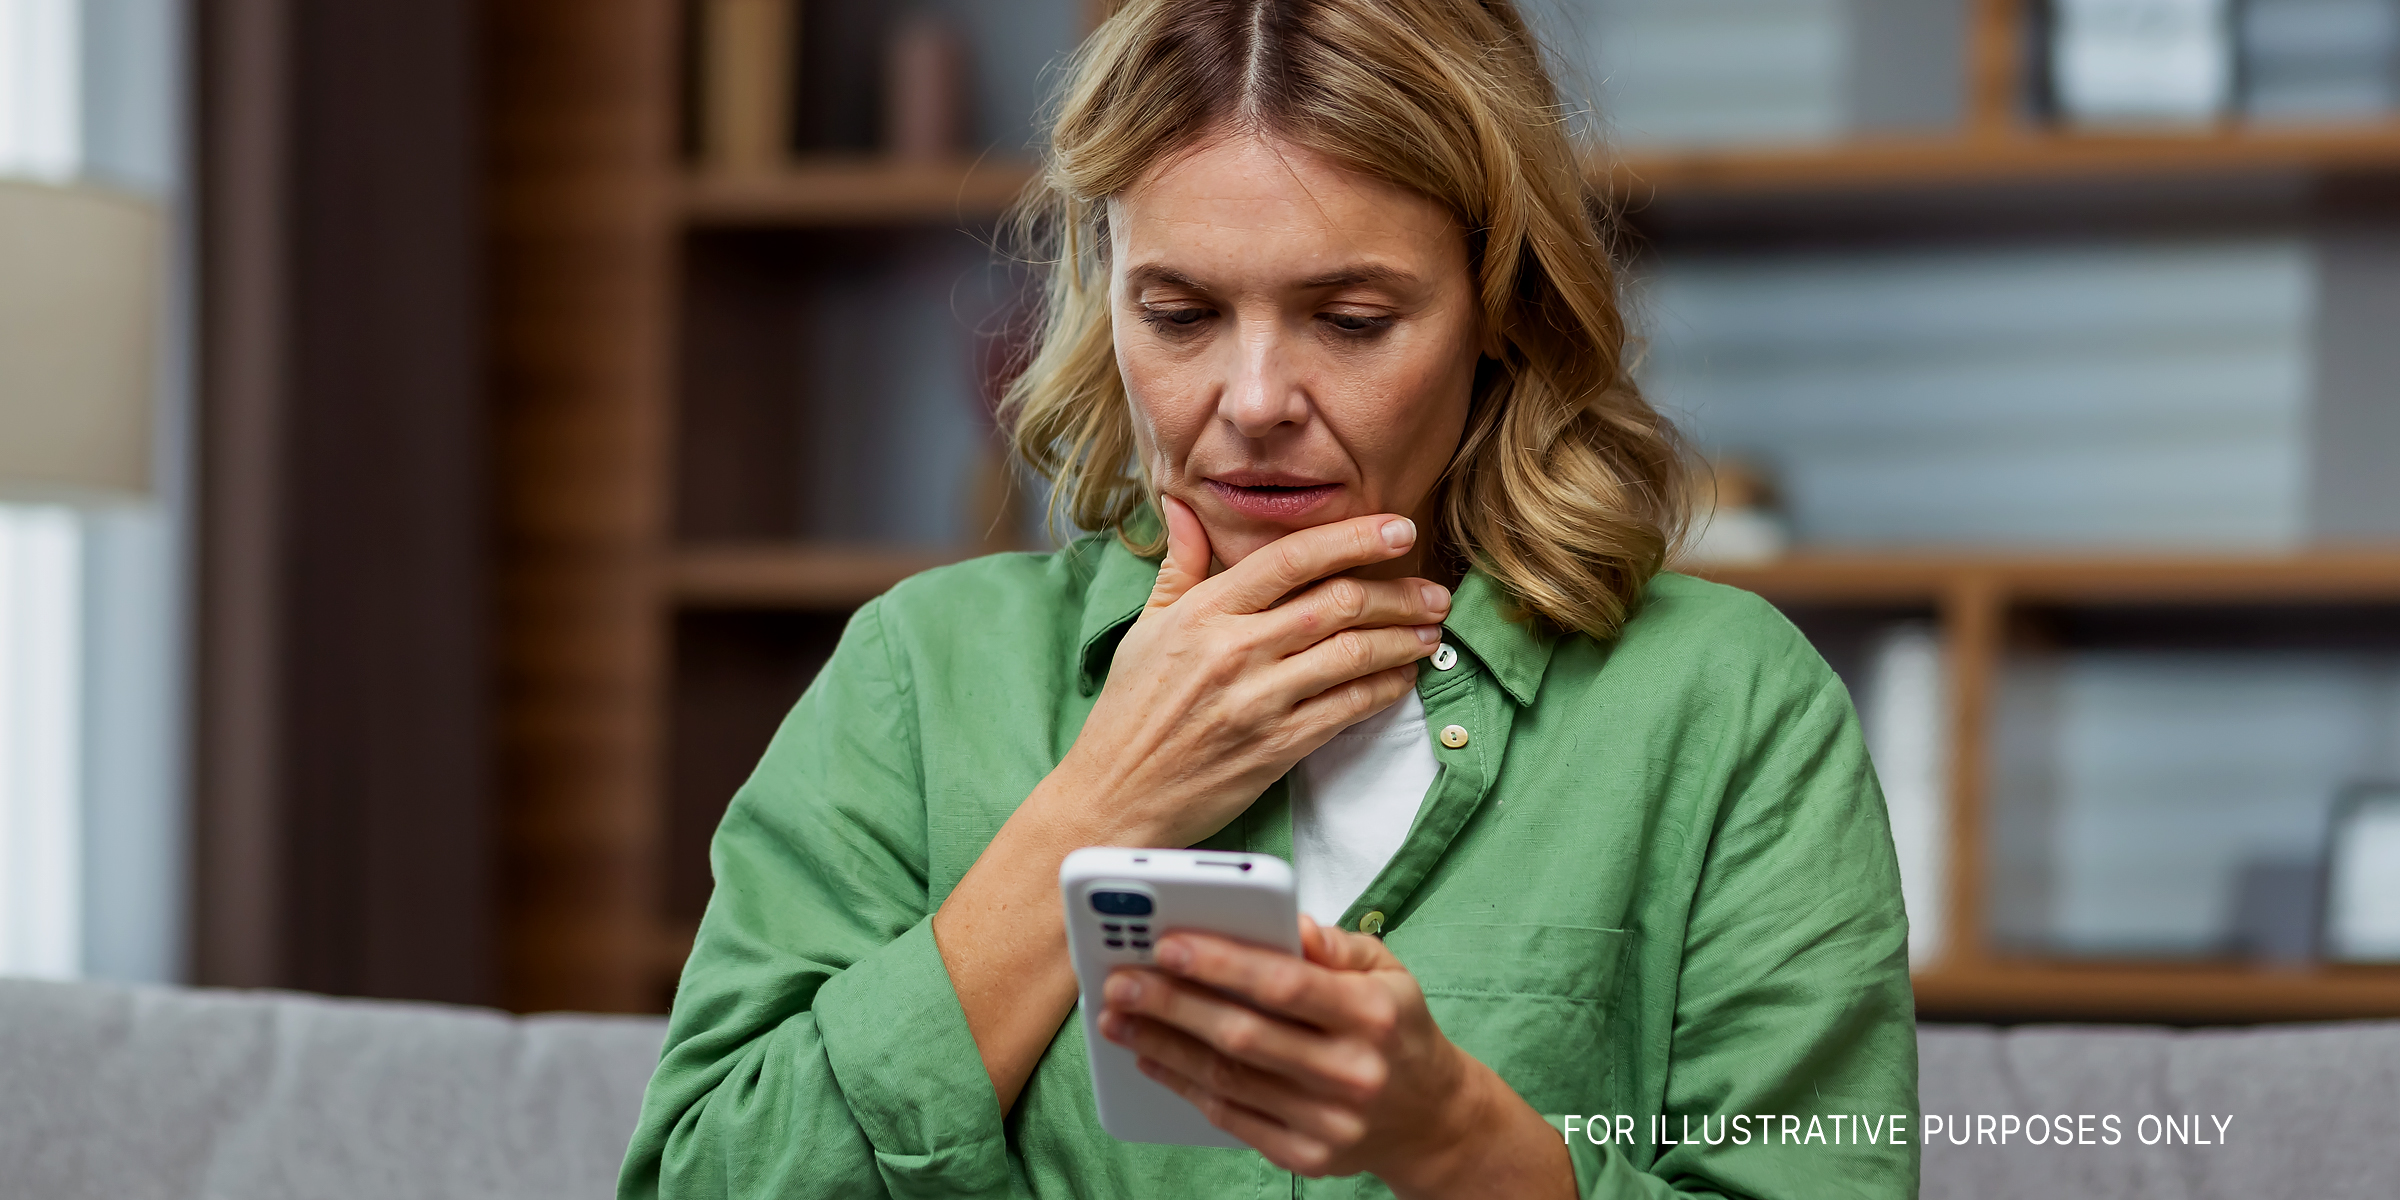 Woman looking at her phone, perplexed | Source: Shutterstock